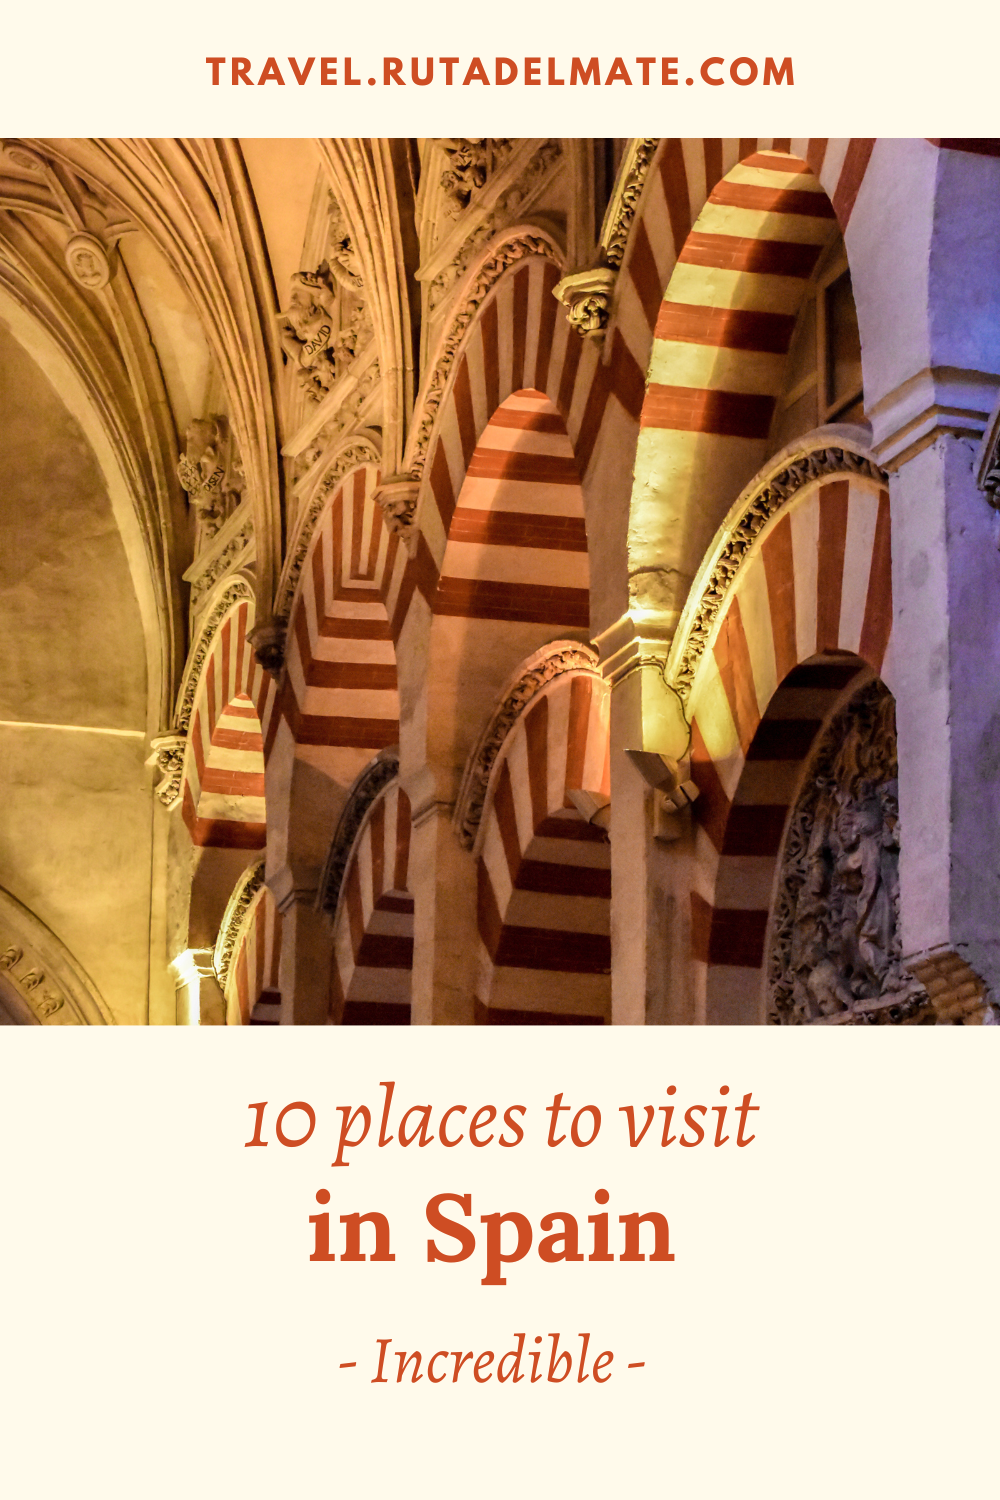 10 most beatiful places to visit in Spain